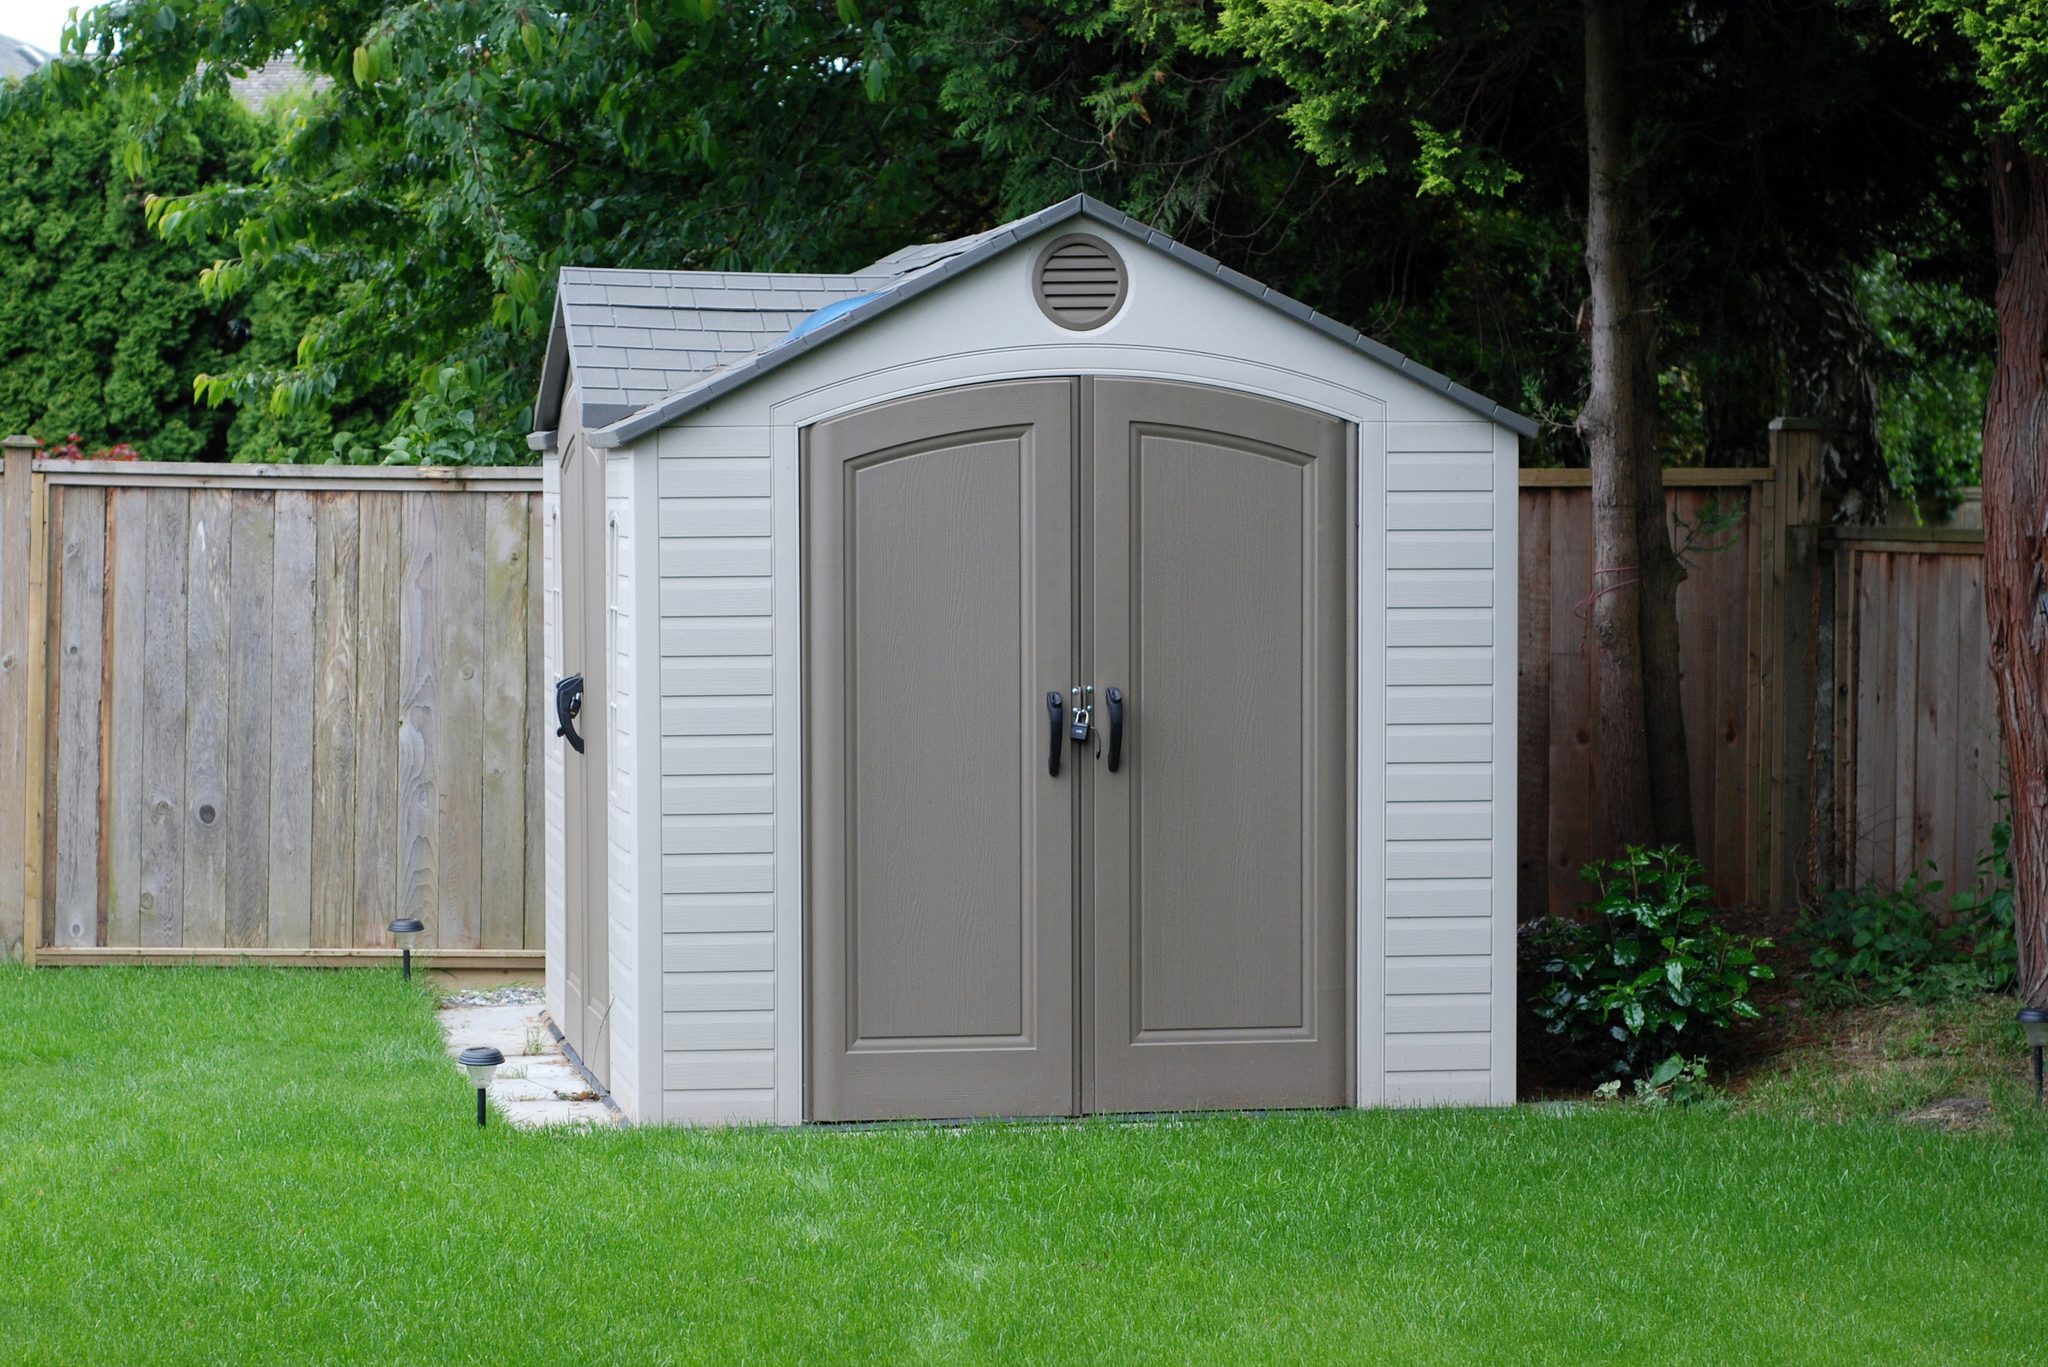 6 Things To Know Before Assembling a Shed Kit